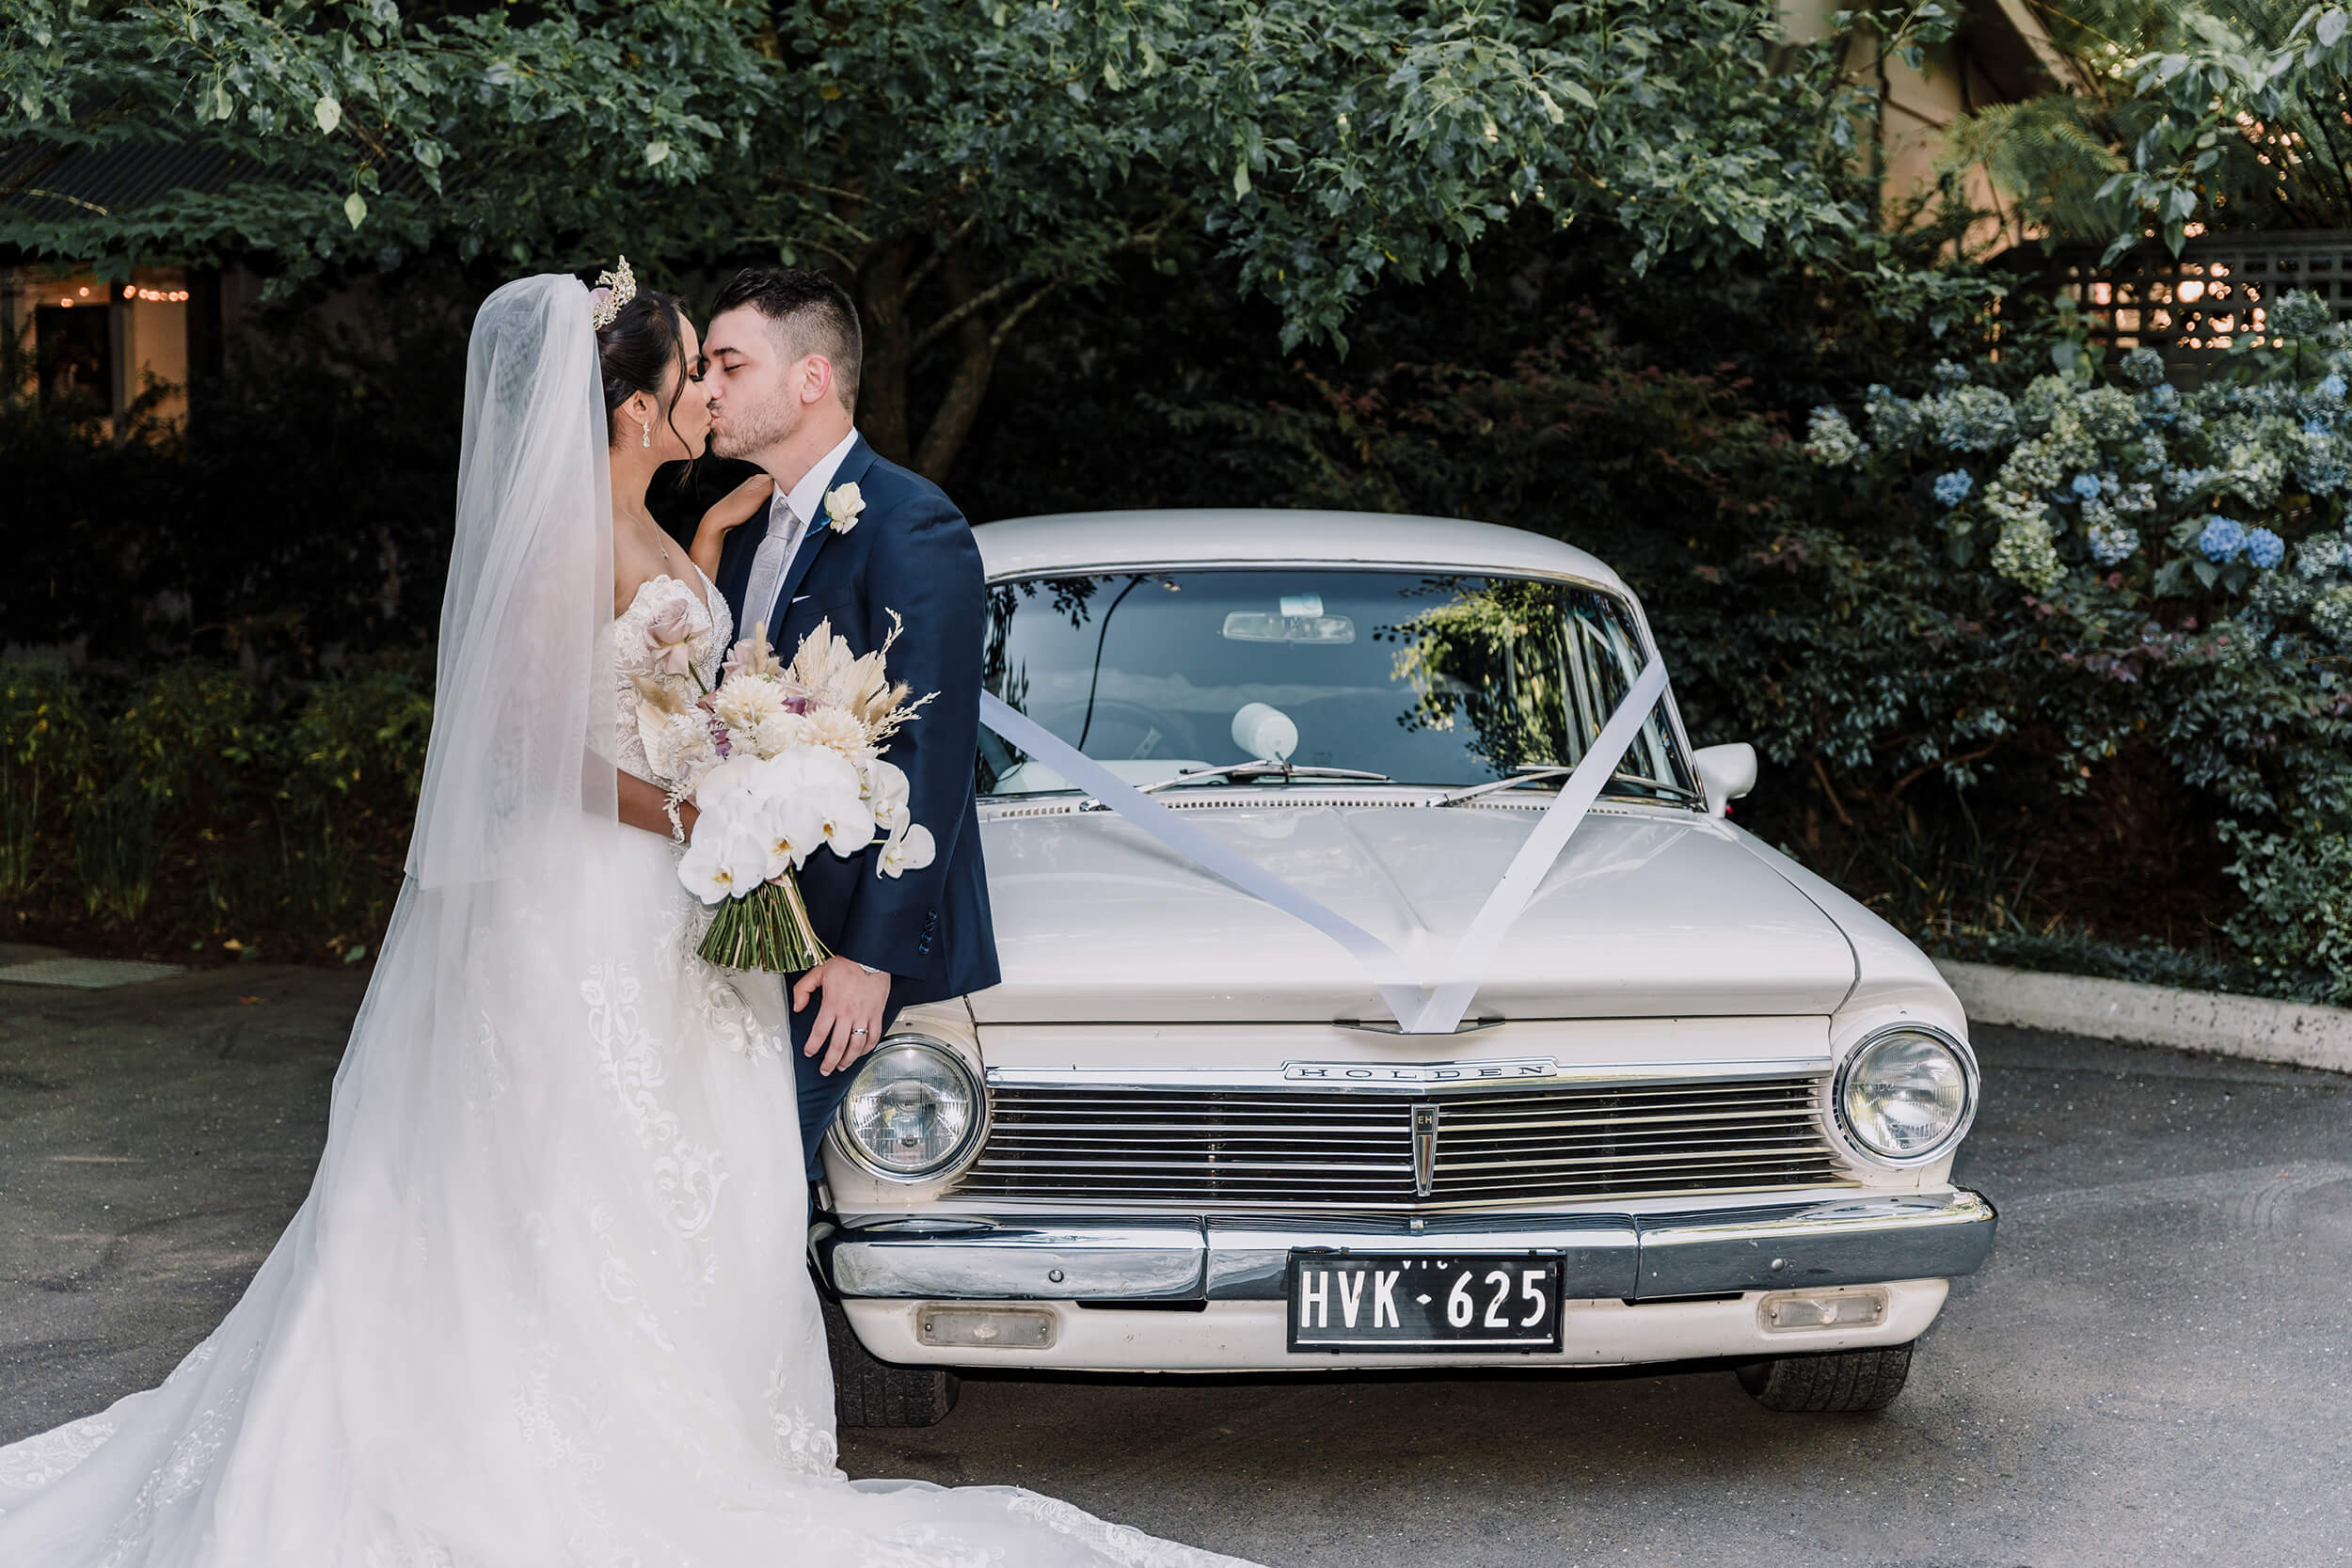 Bride and groom kisses each other by the wedding car. Captured by Black Avenue Productions